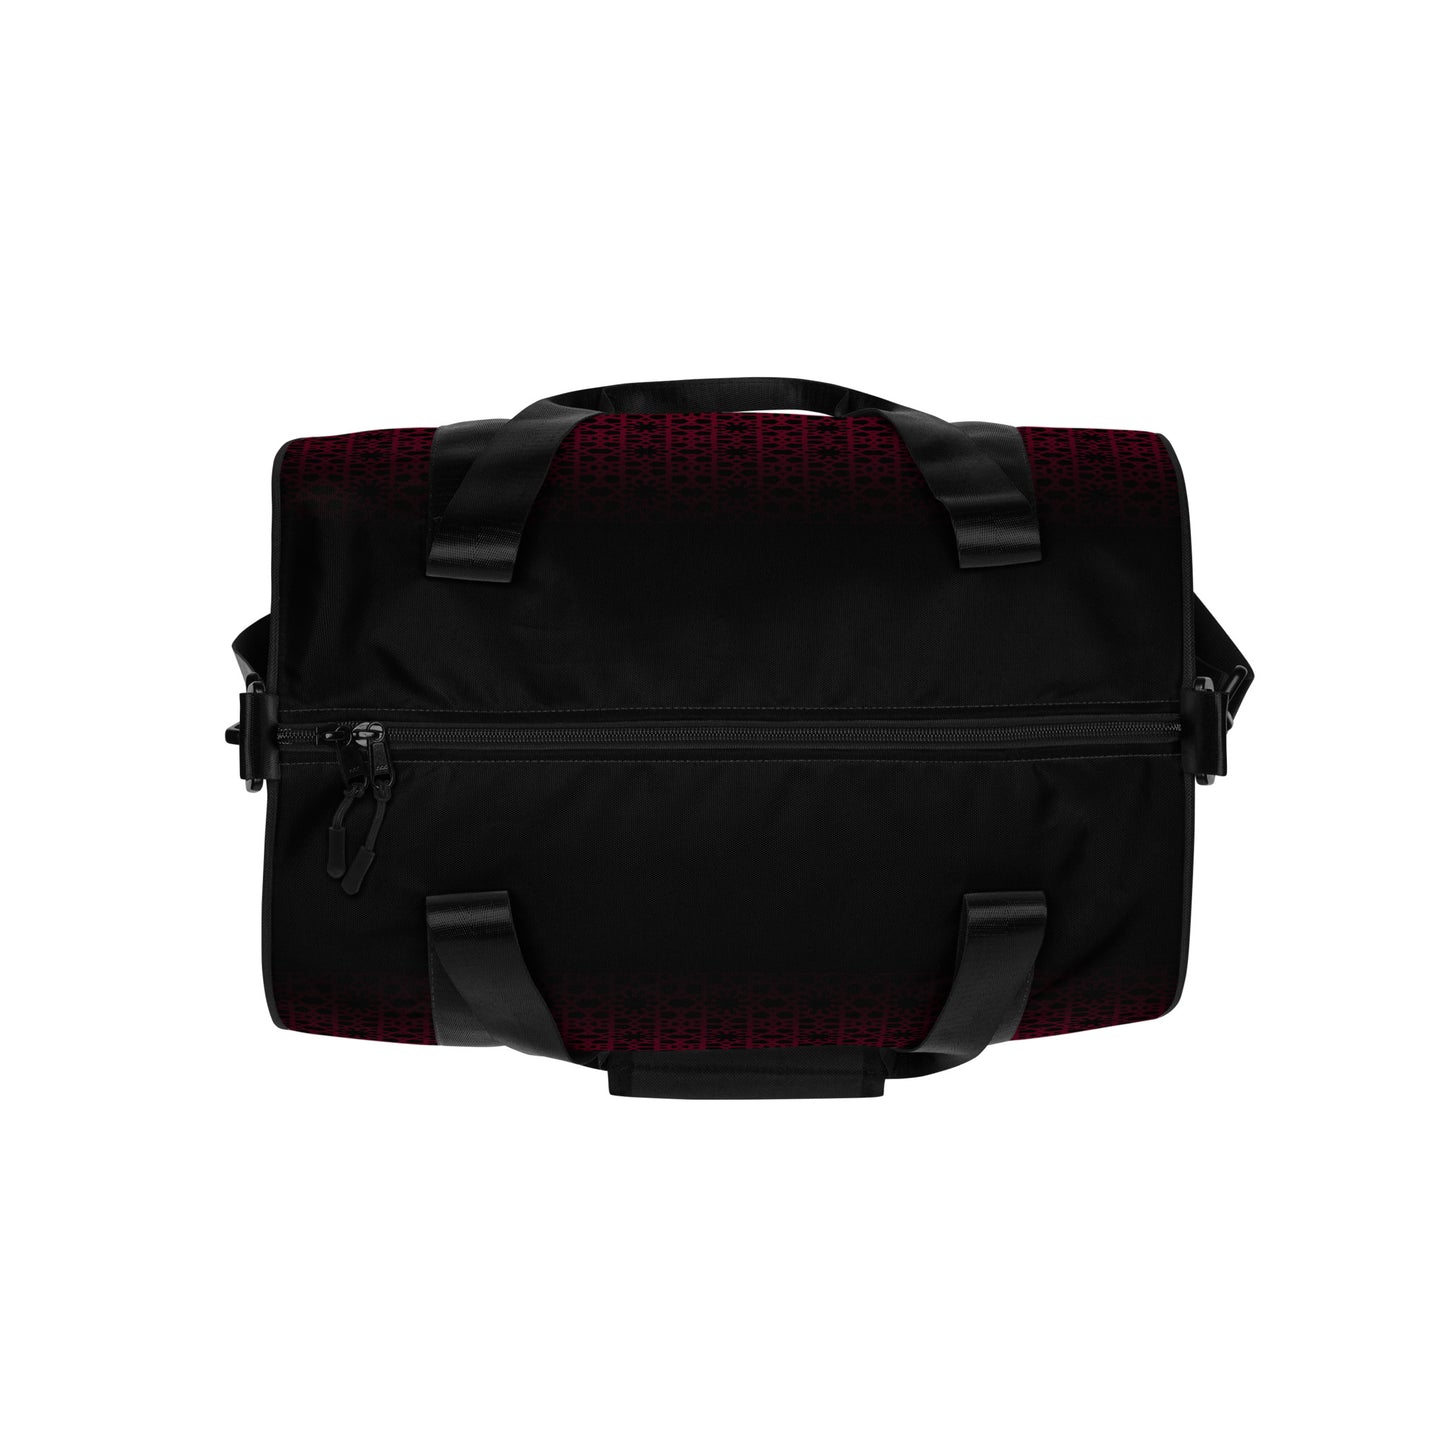 All-over print gym bag - Geometric Ombre in Black and Red